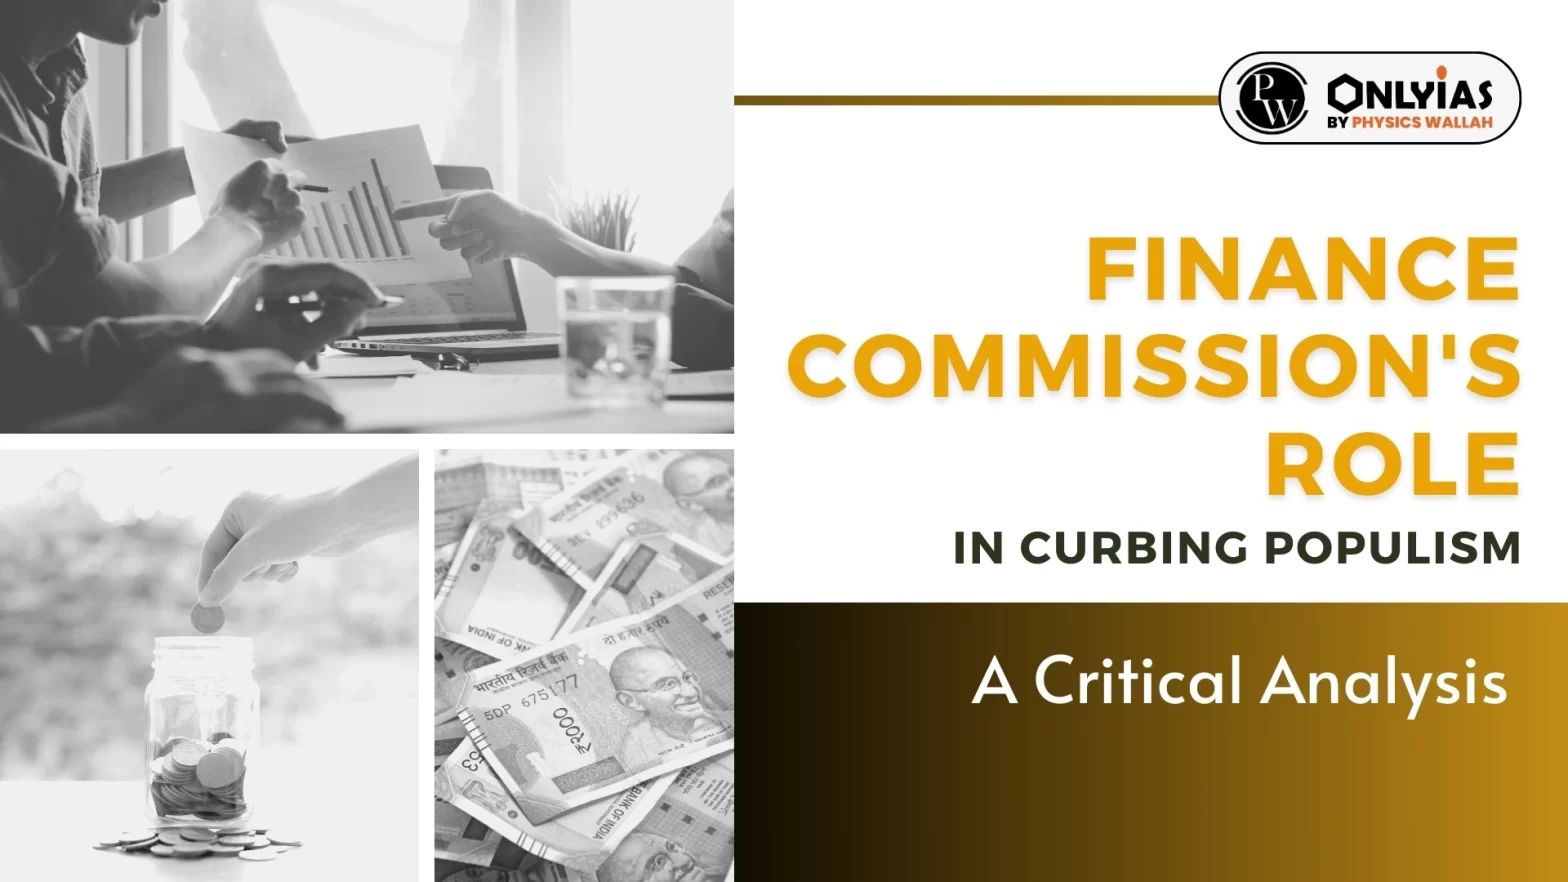 Finance Commission’s Role in Curbing Populism: A Critical Analysis